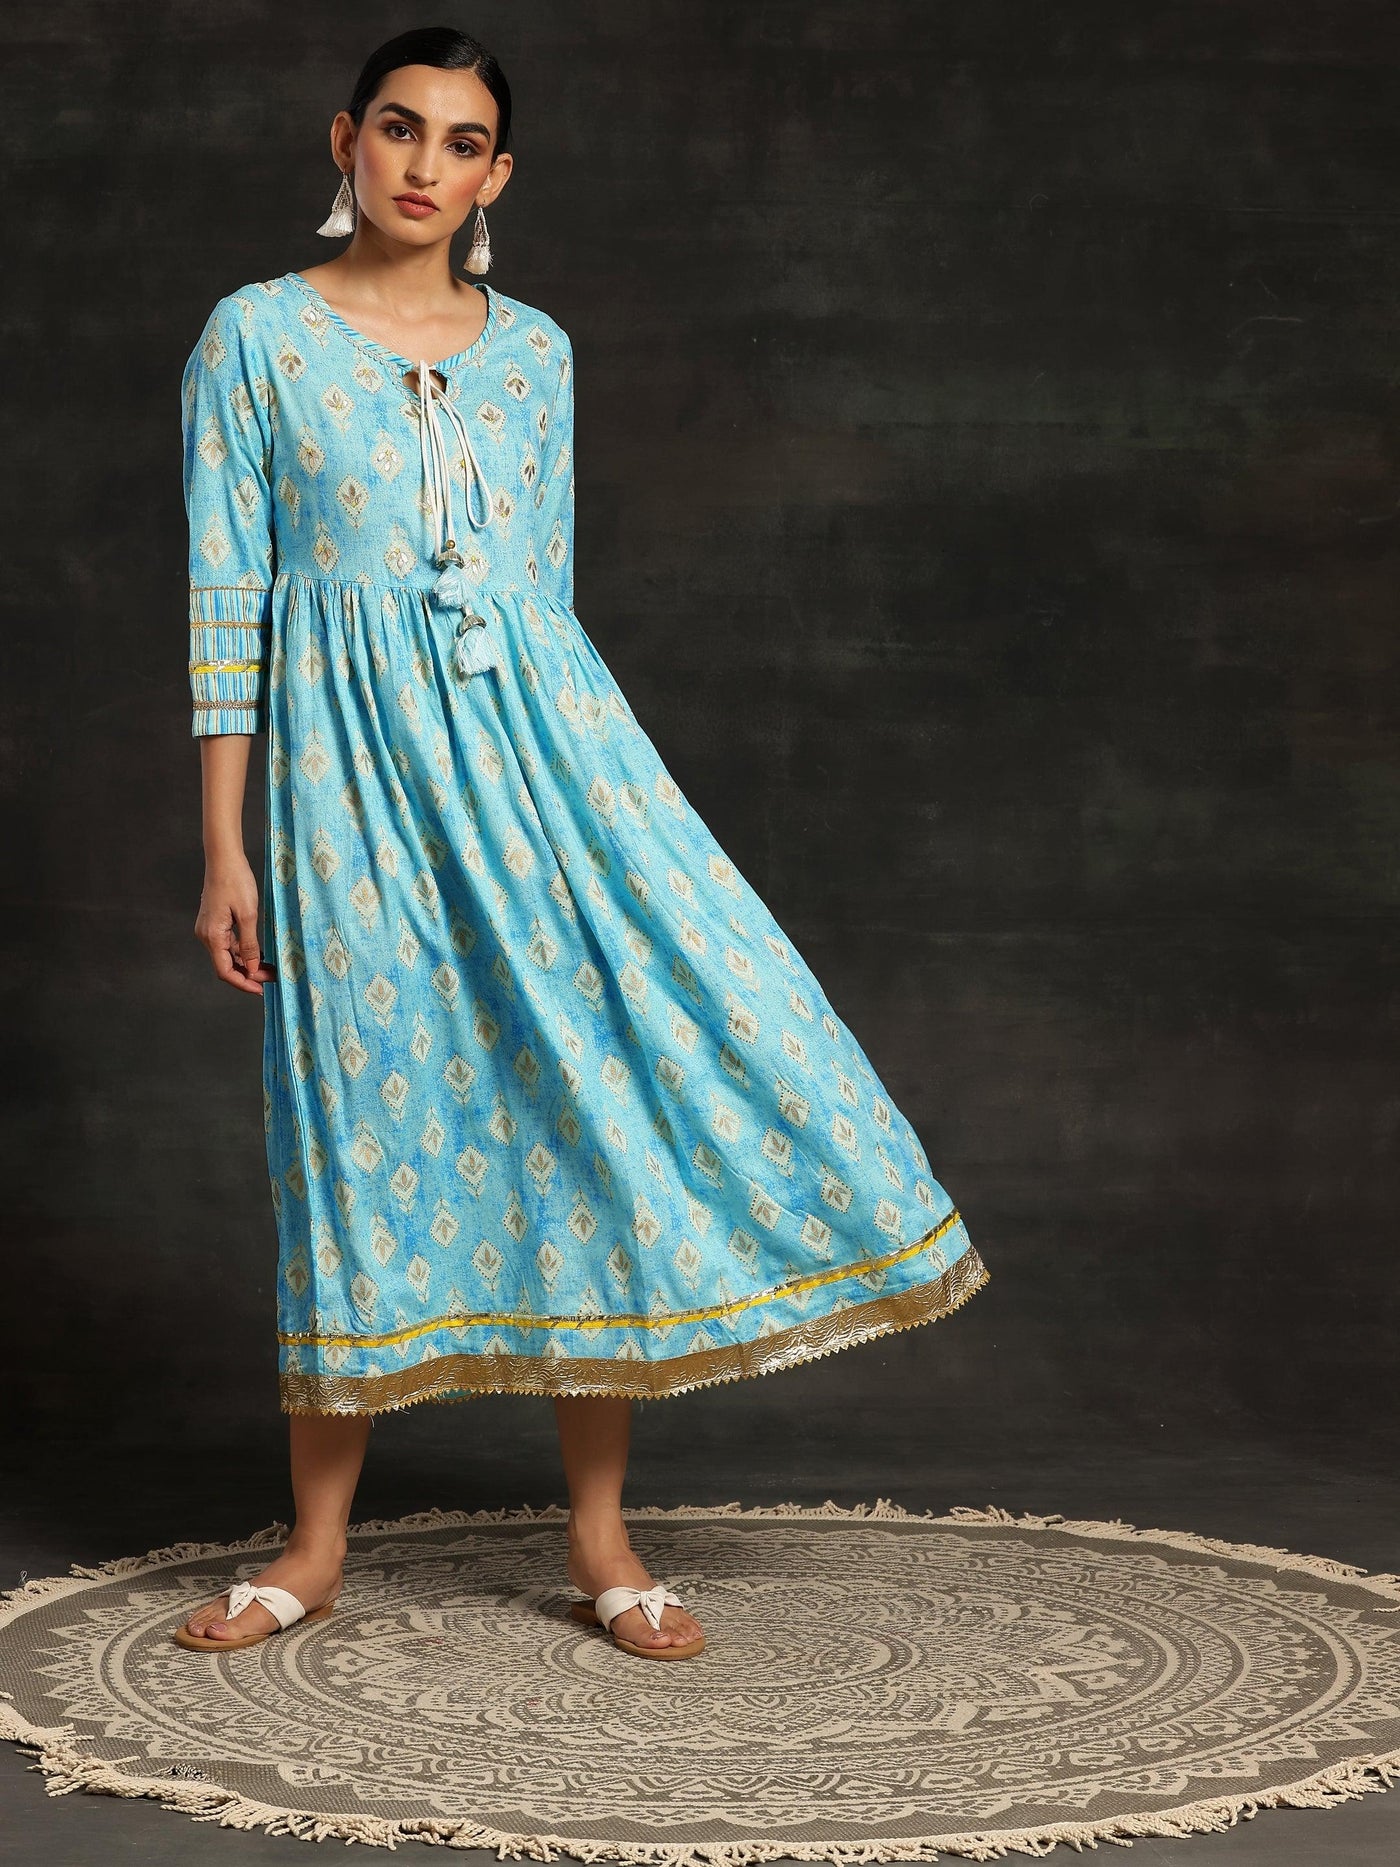 Turquoise Printed Cotton Fit and Flare Dress - ShopLibas